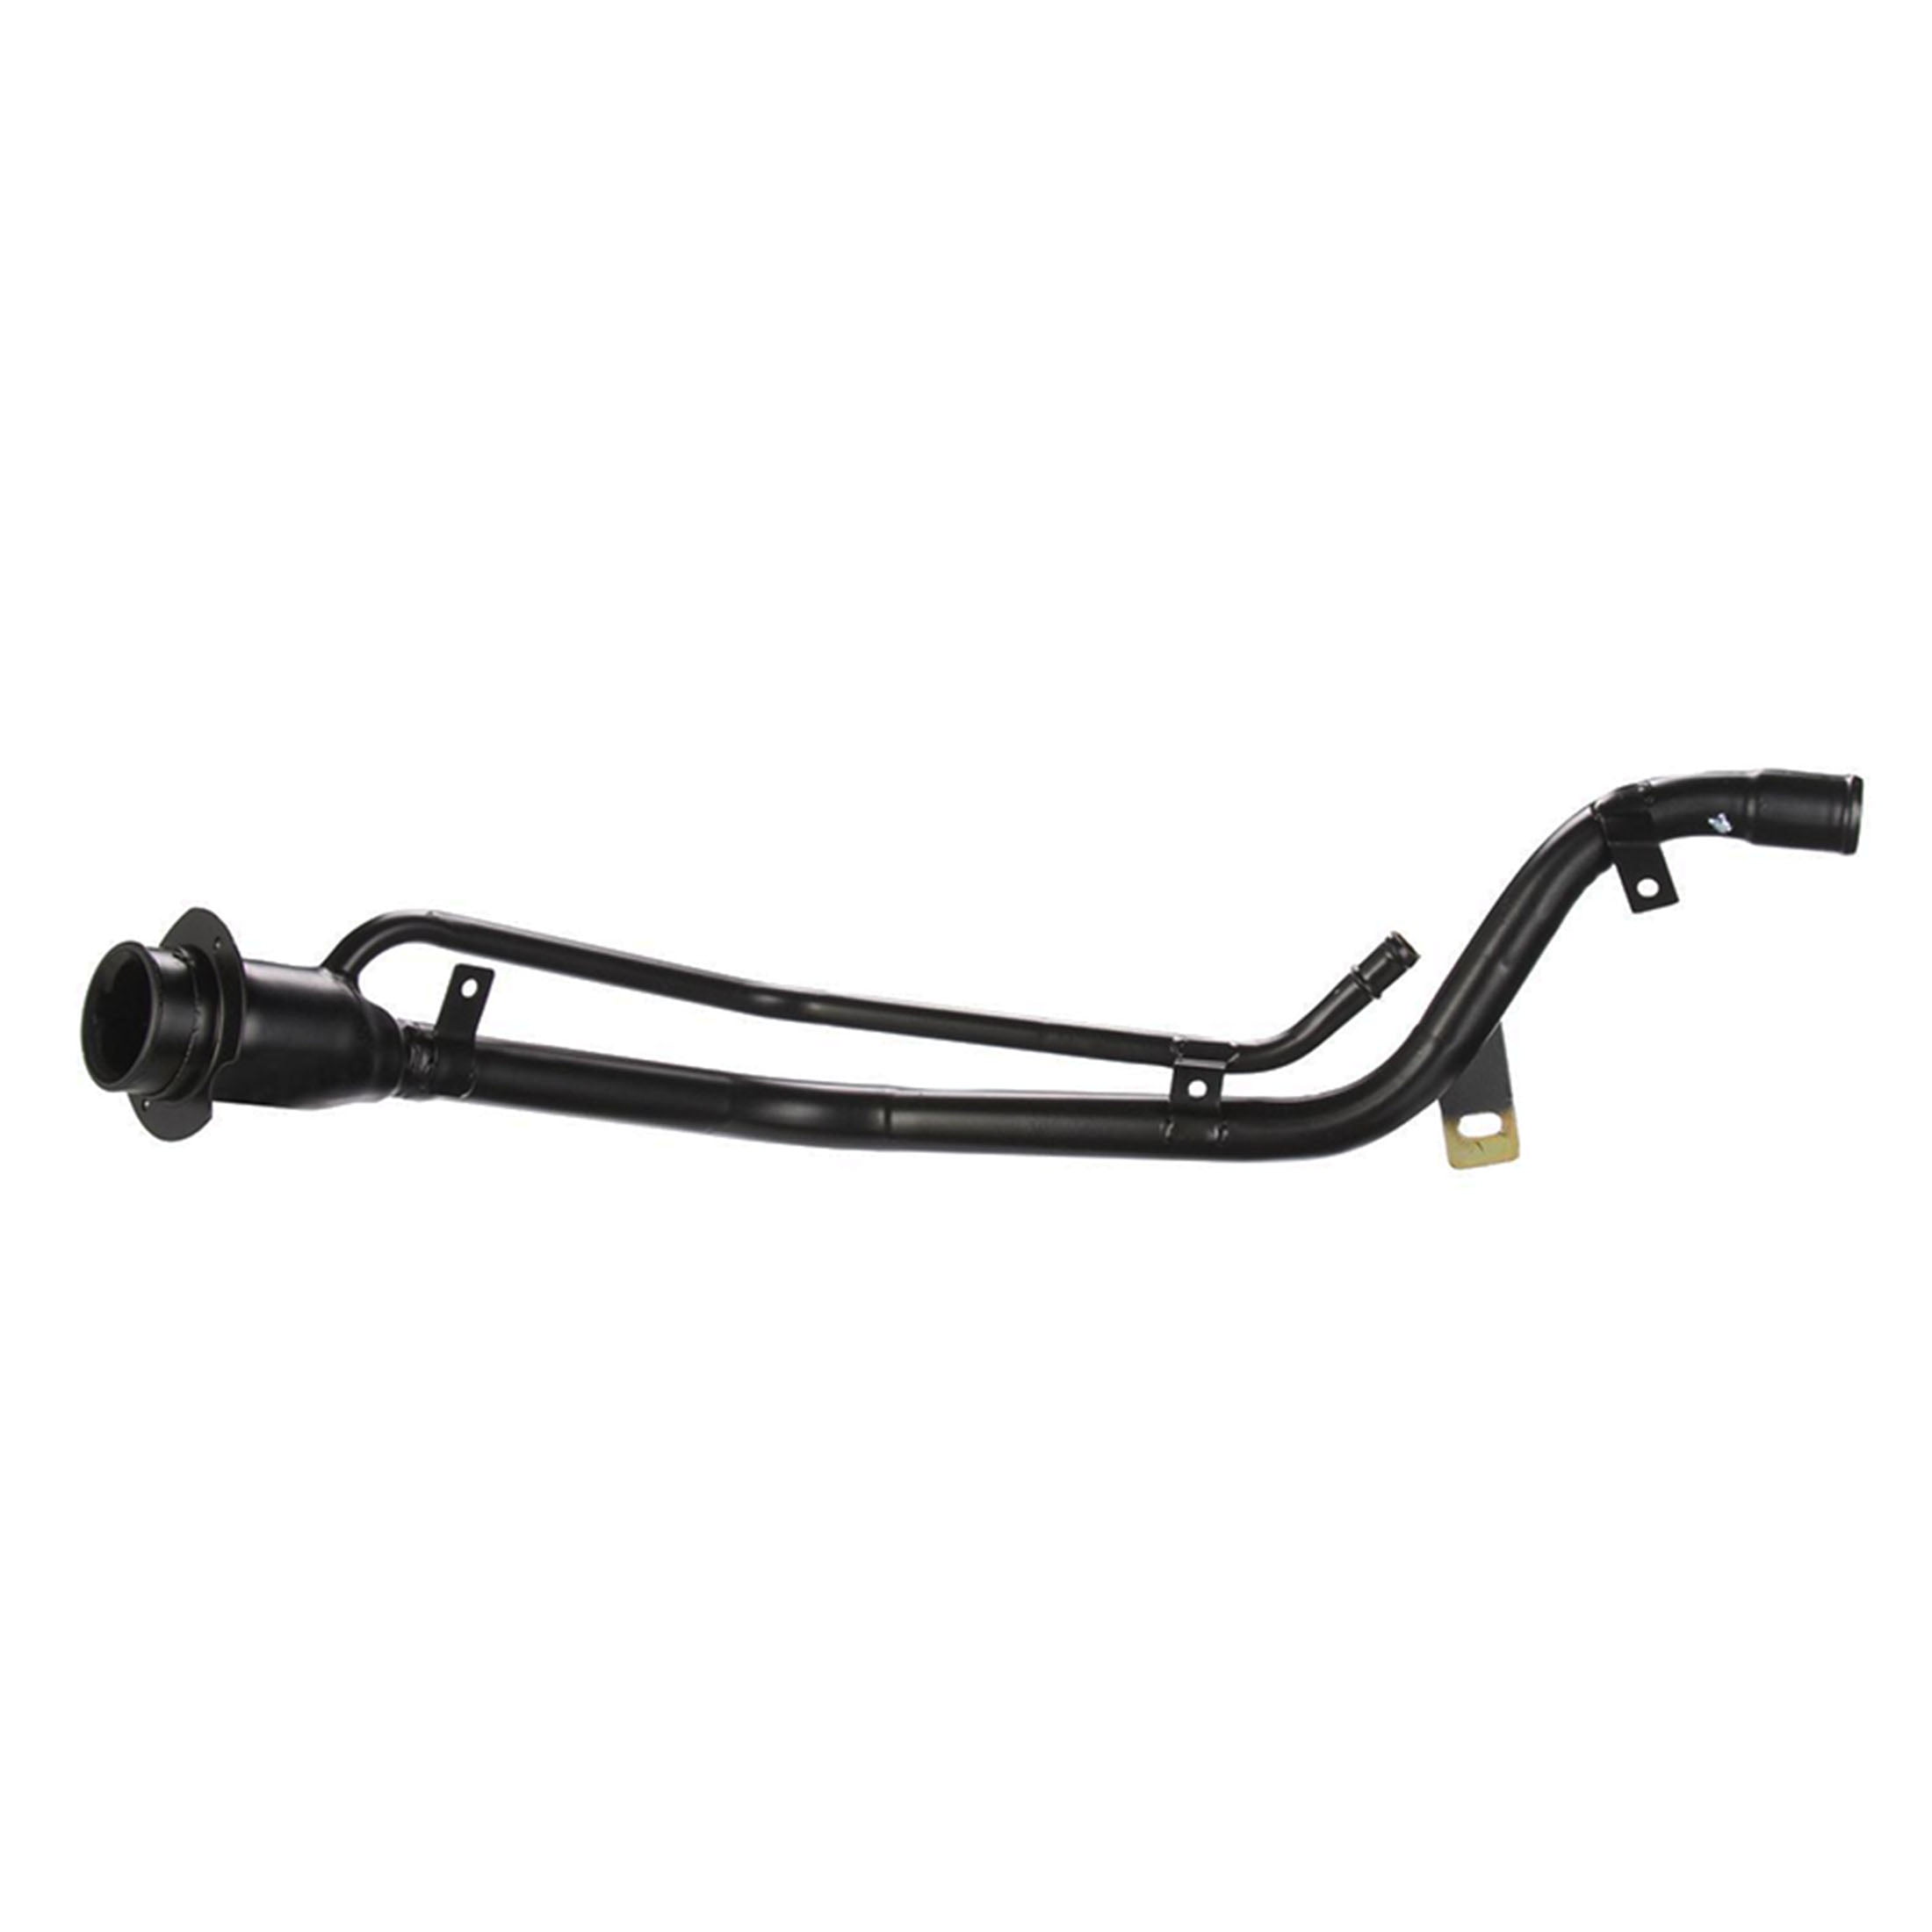 Agility Auto Parts 4063171 Fuel Tank Filler Neck for Mazda